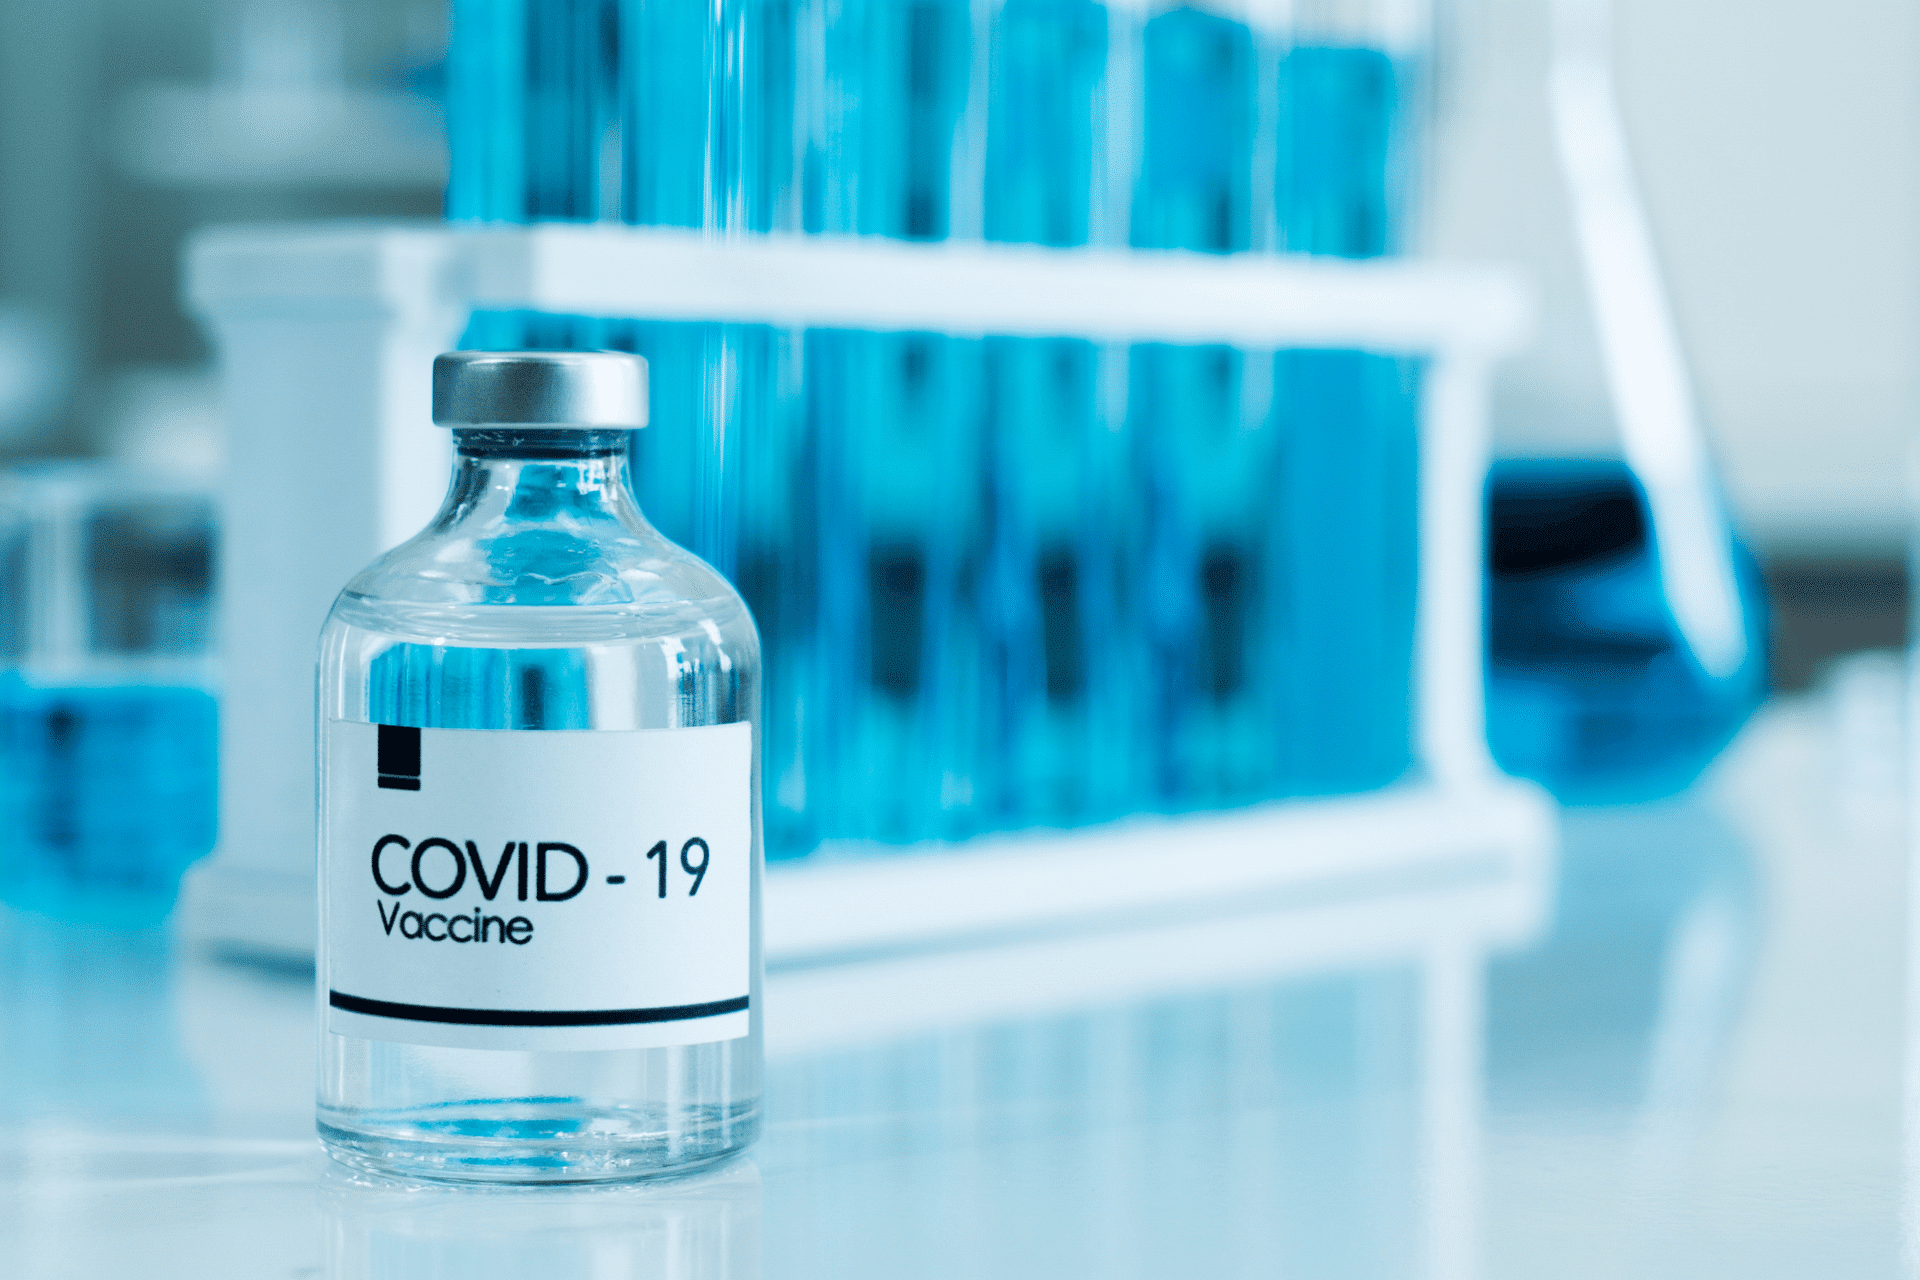 bottle of COVID vaccine on a table